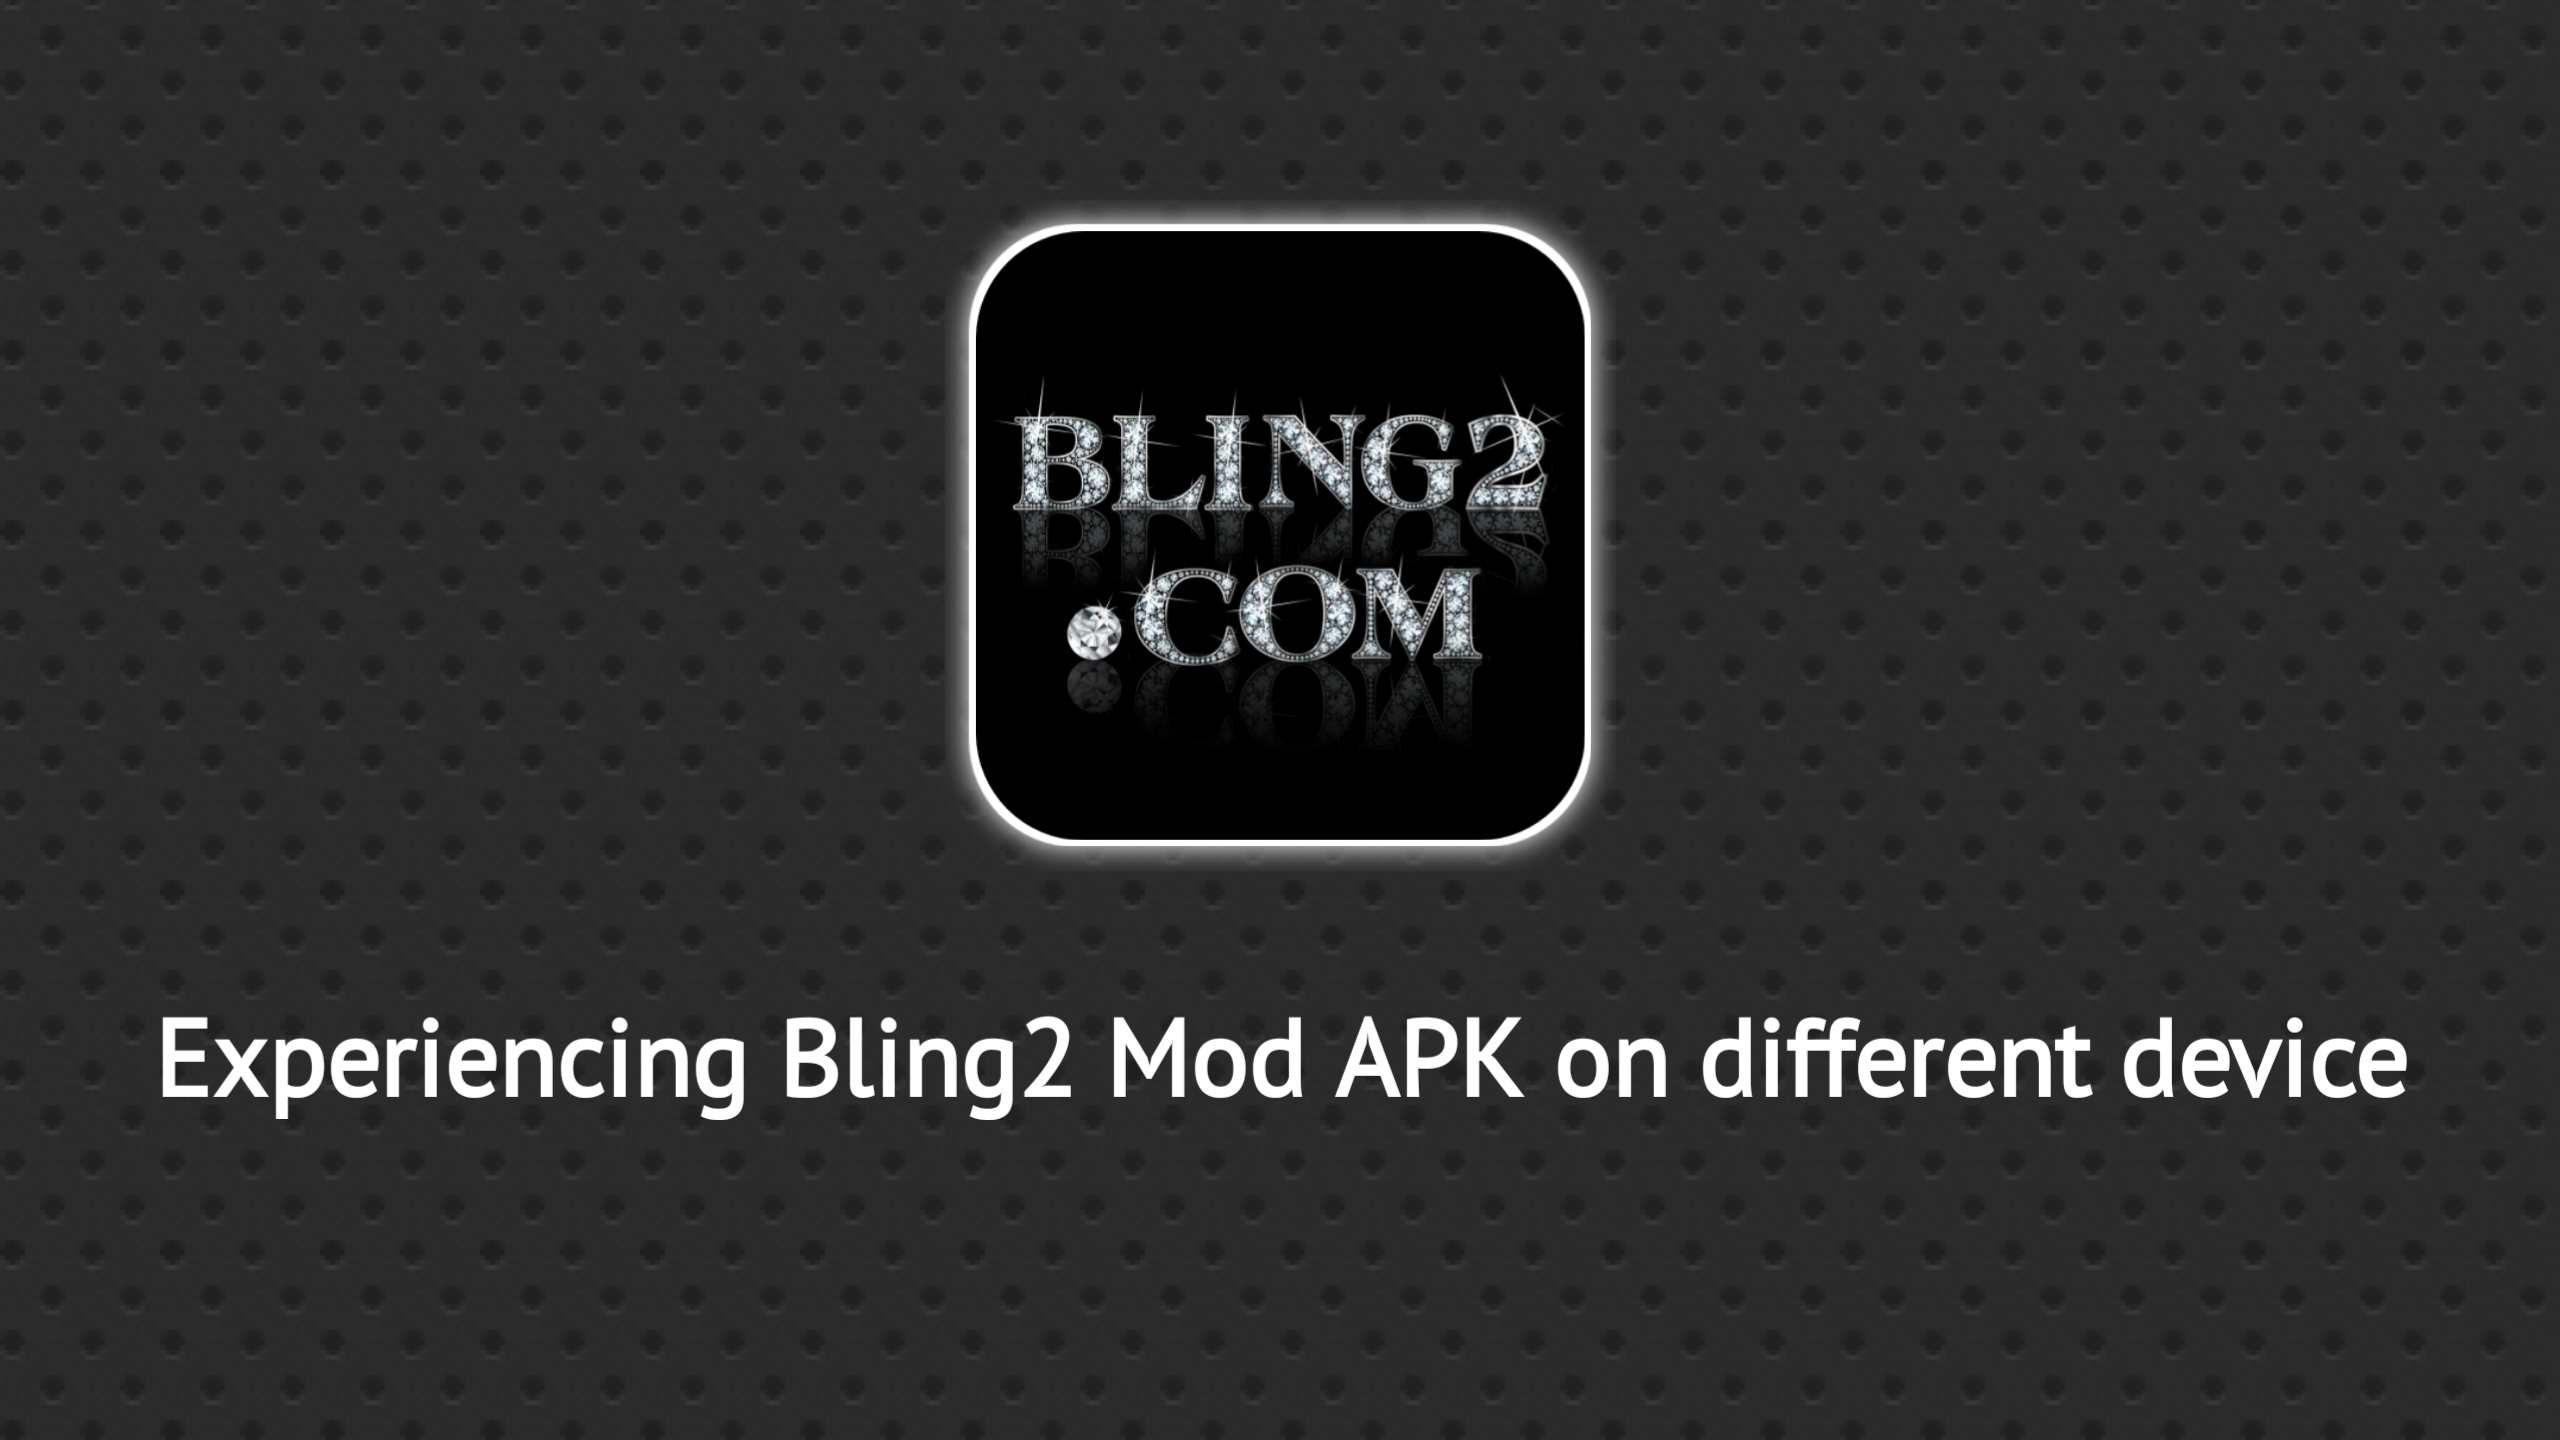 Experiencing Bling2 Mod APK on different devices